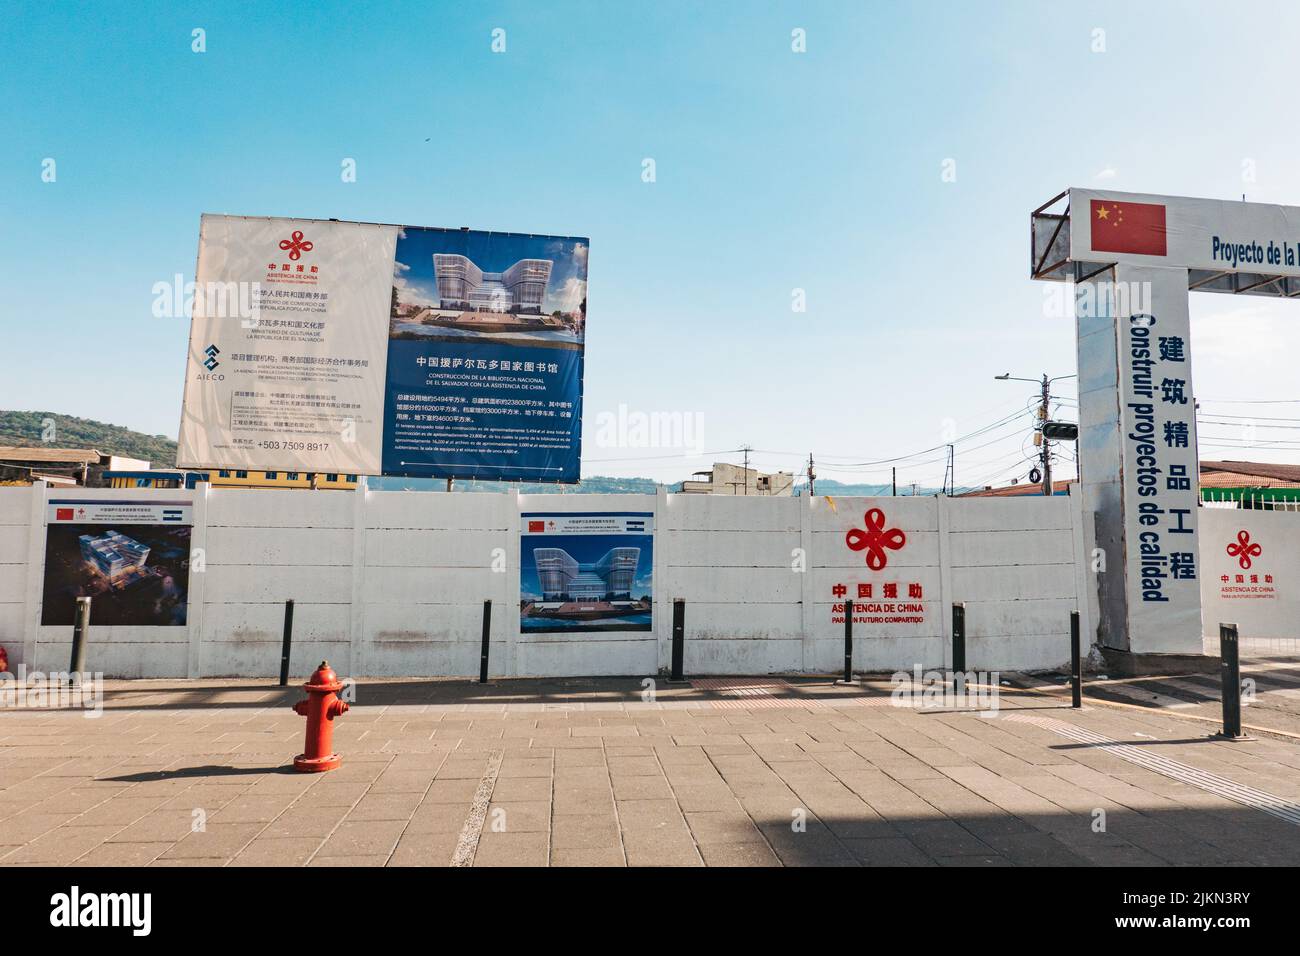 a billboard depicting the end result of a China-assisted construction project to build a new national public library in San Salvador, El Salvador Stock Photo